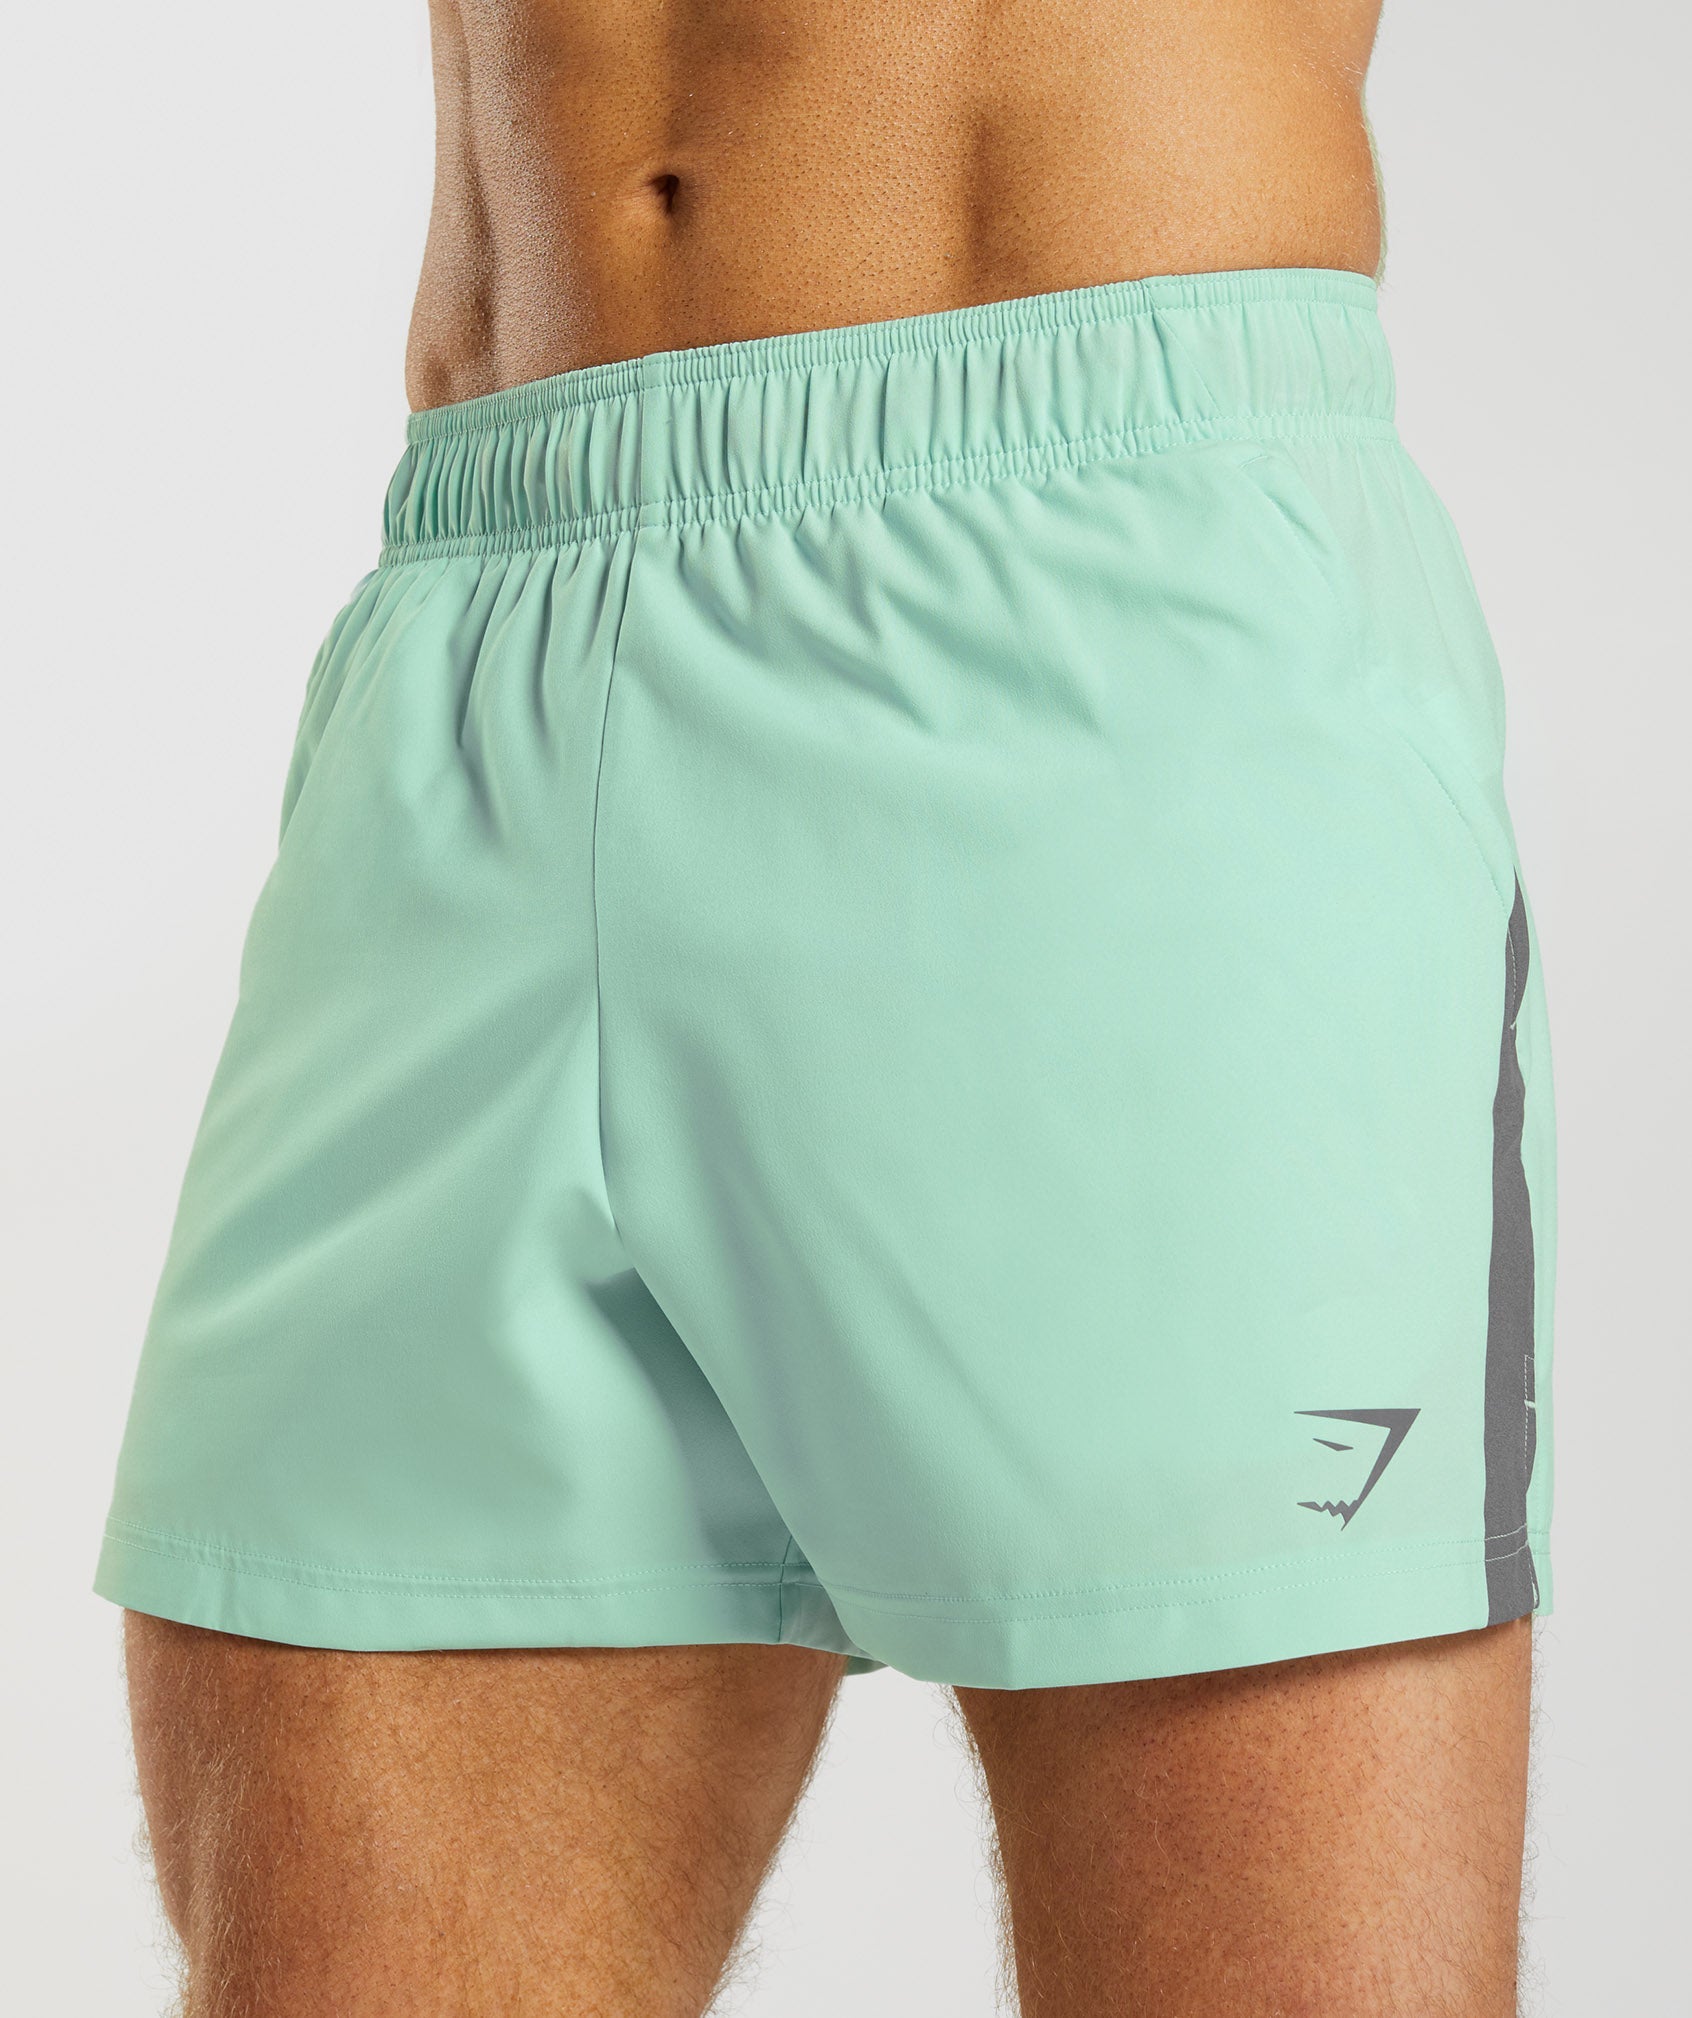 Sport 5" Shorts in Pastel Green/Silhouette Grey - view 5